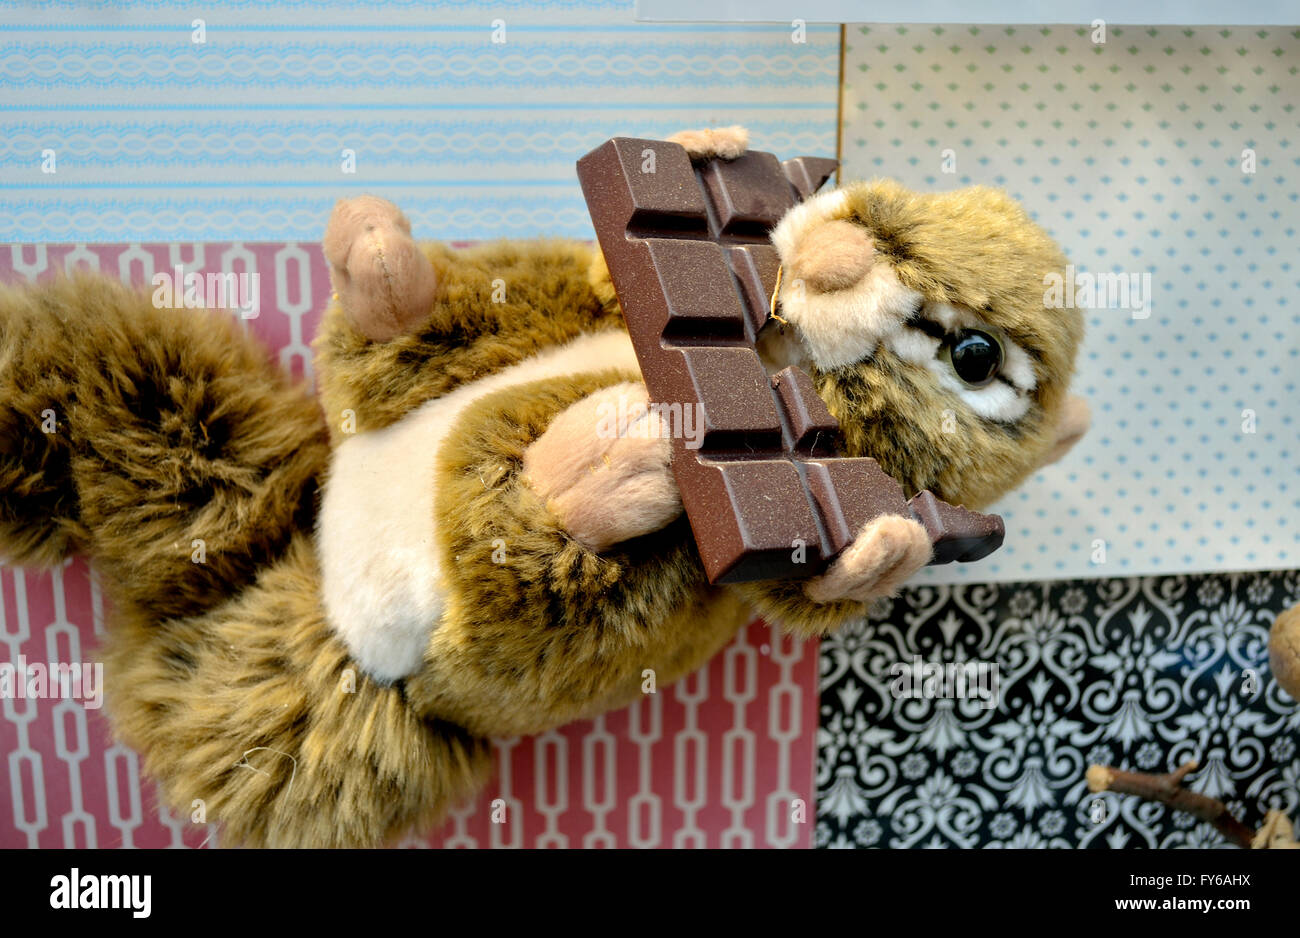 Prague, Czech Republic. Shop window display - squirrel eating a chocolate bar. May contain nuts. Stock Photo